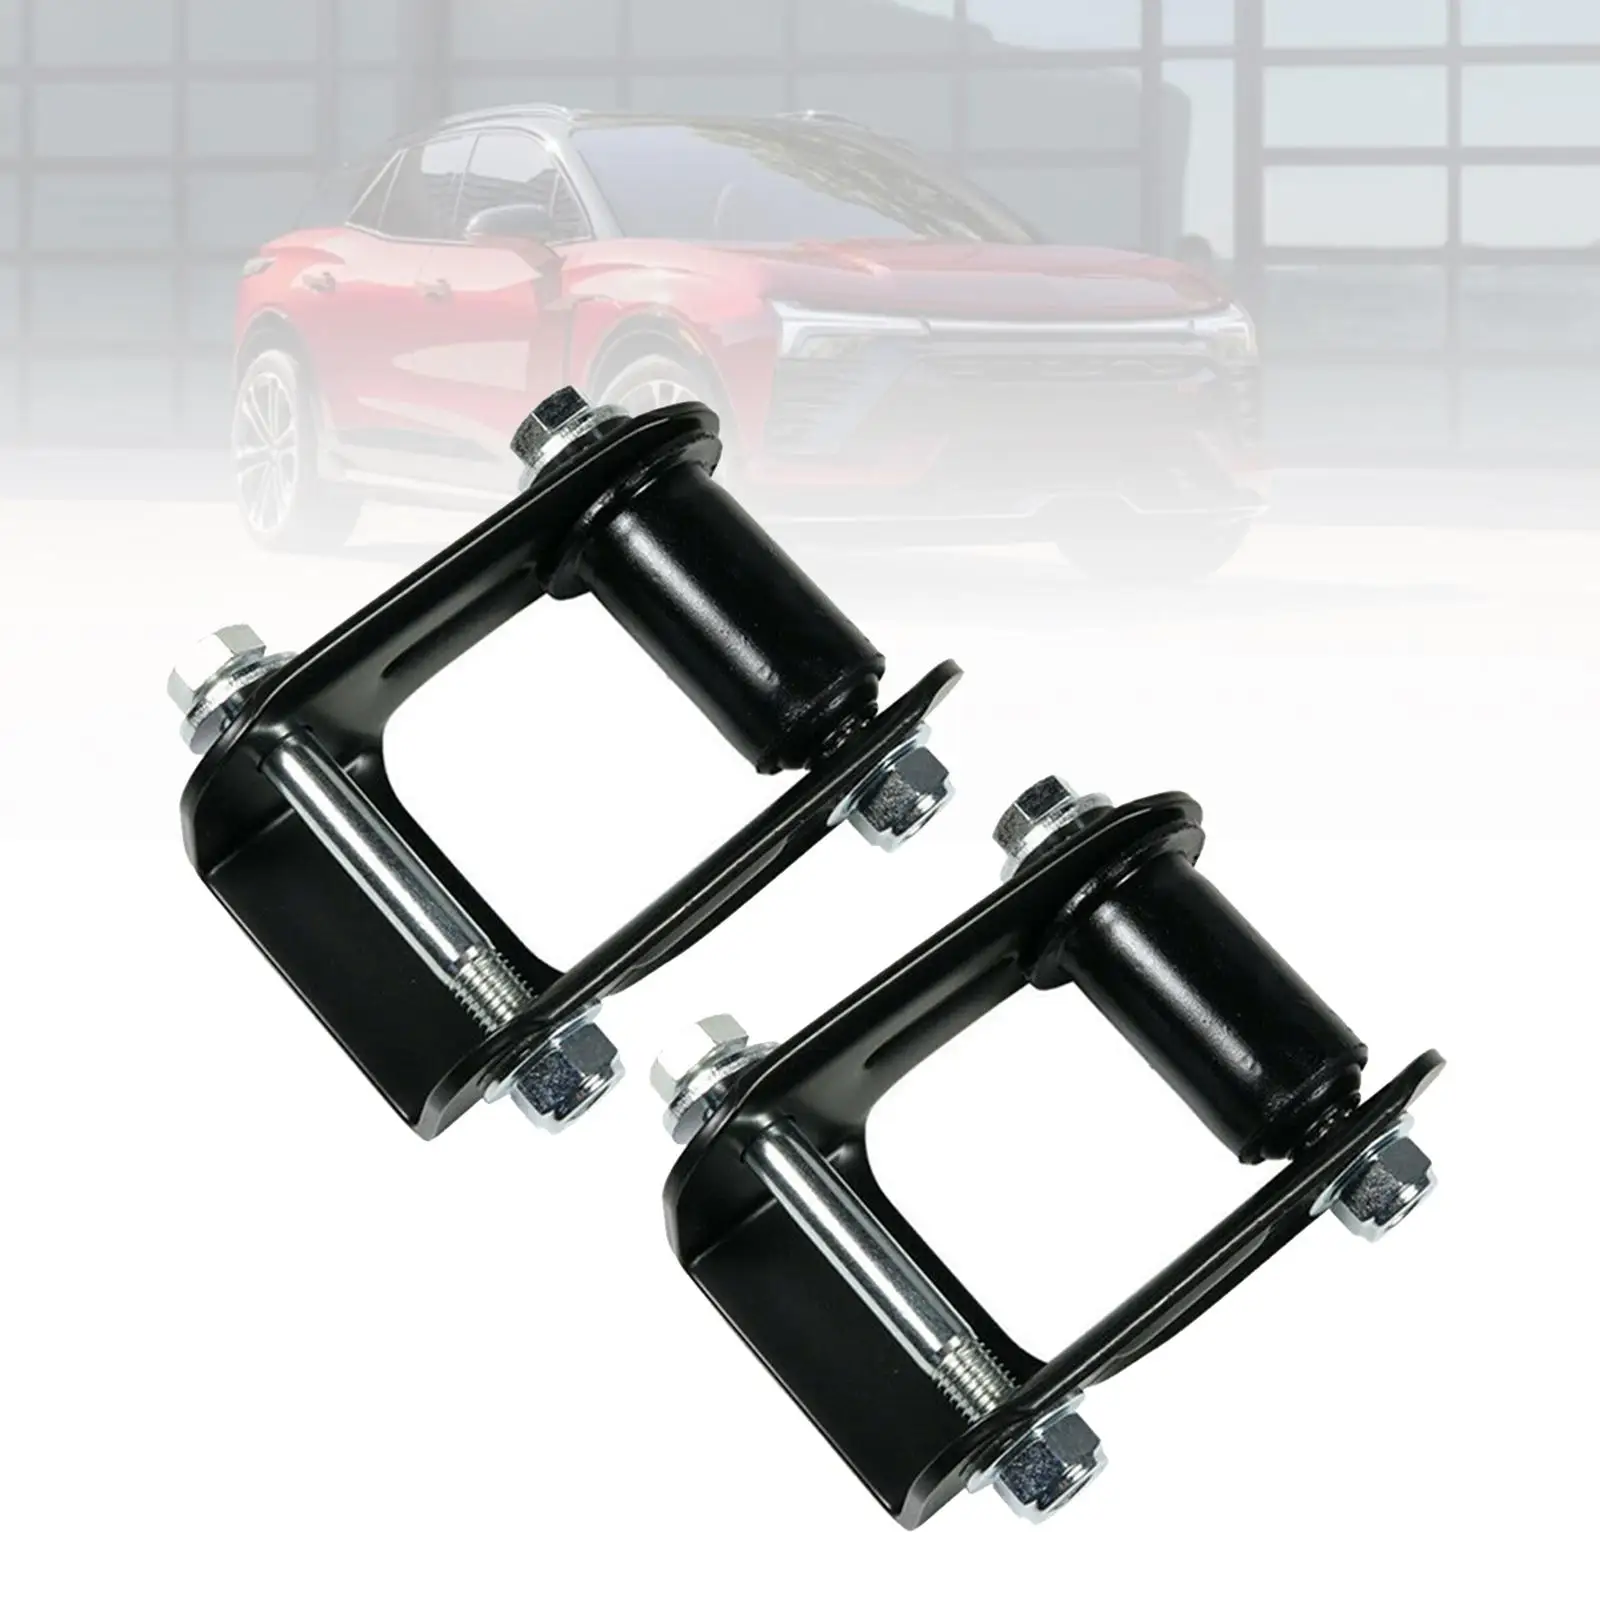 2x Leaf Spring Shackle Kit Durable Spare Parts Easily Install replacement Chevrolet S10 Pickup Blazer S10 Blazer